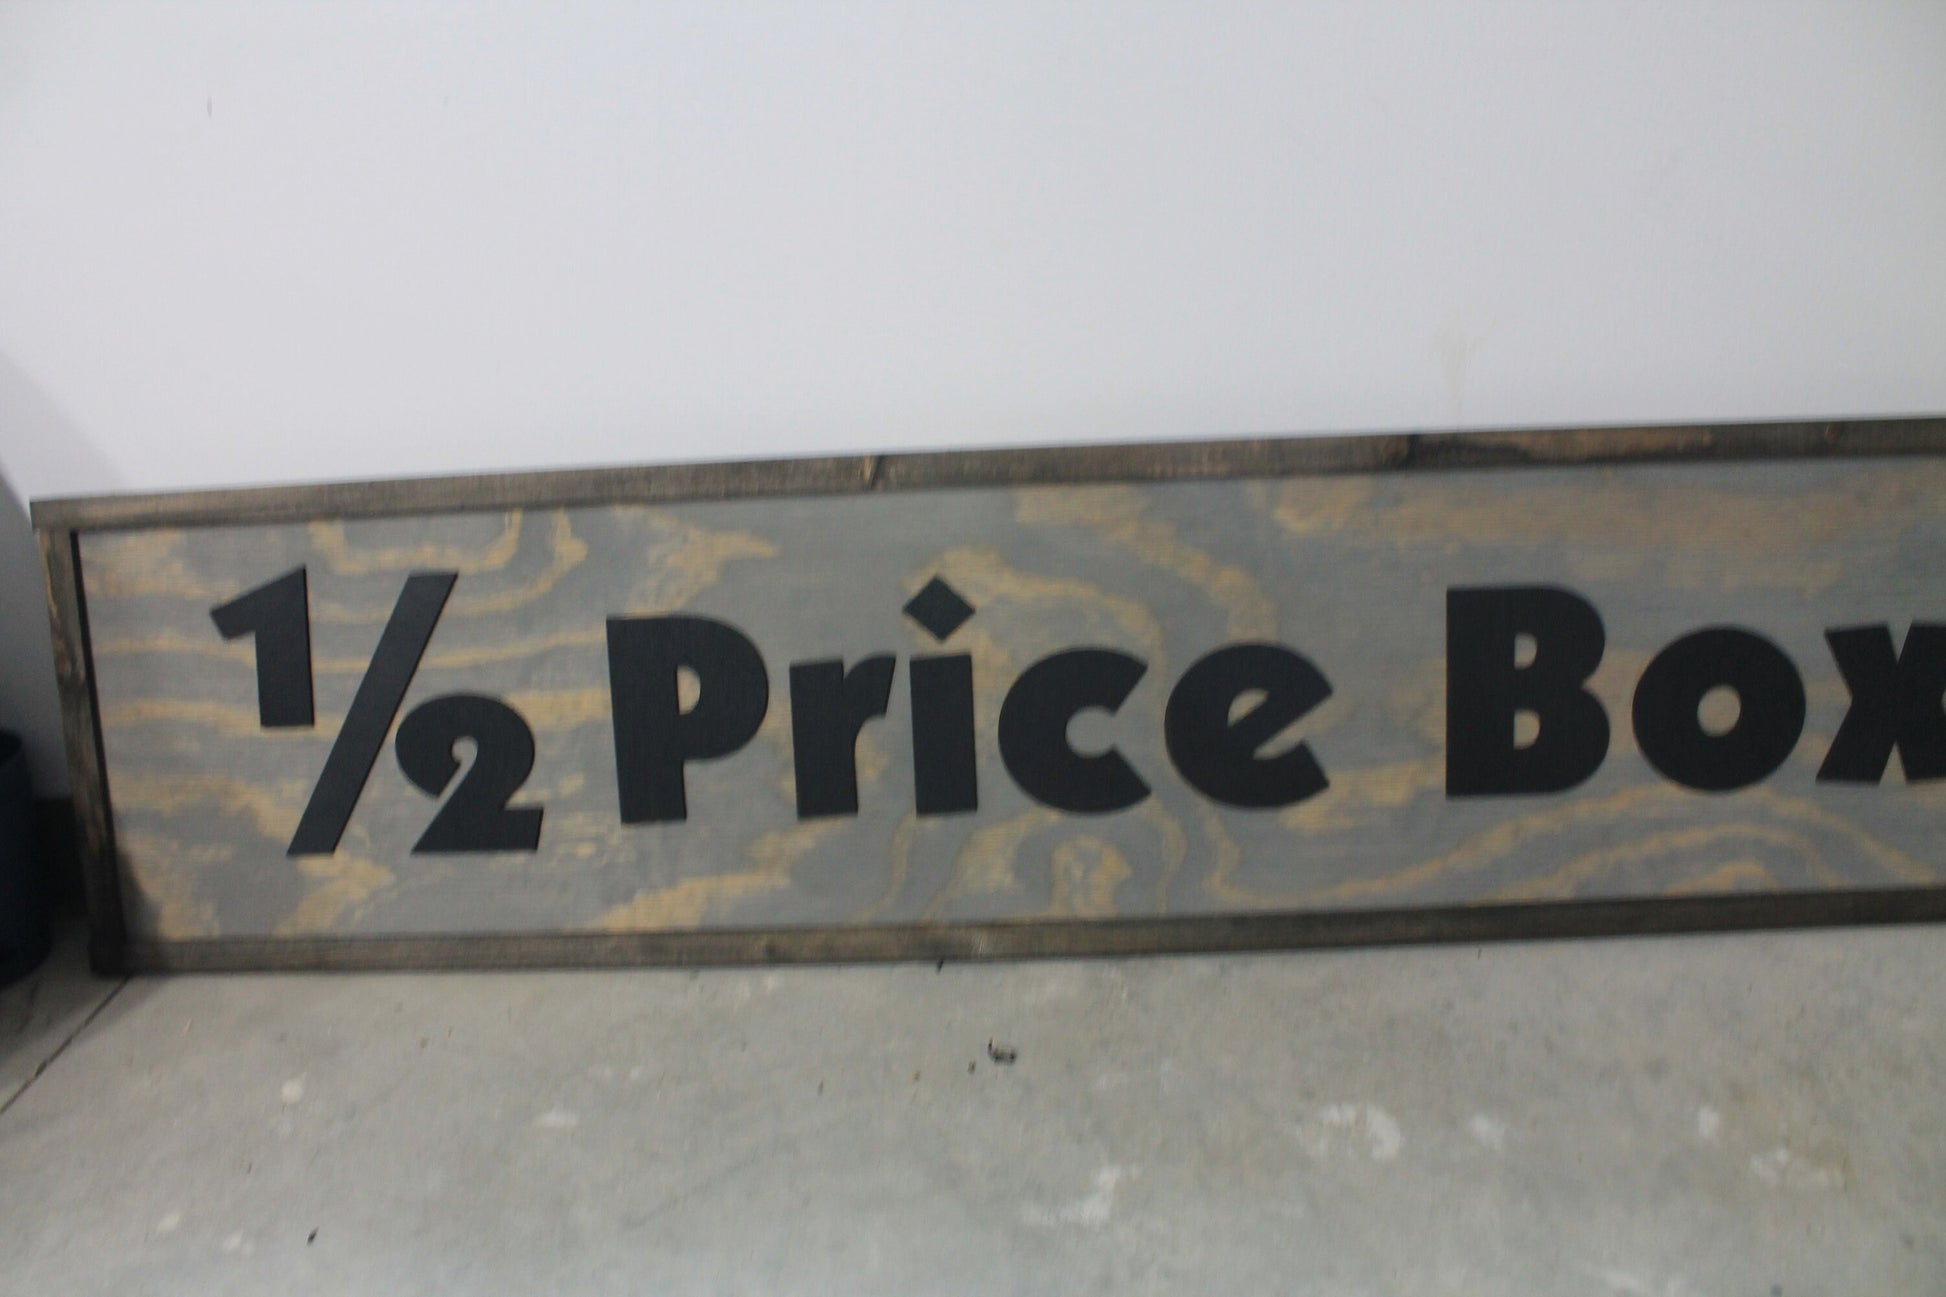 Commerical Business Signage Large Personalized Box Store Wooden 3D Raised Image Sign Business Logo Laser Cut Handmade